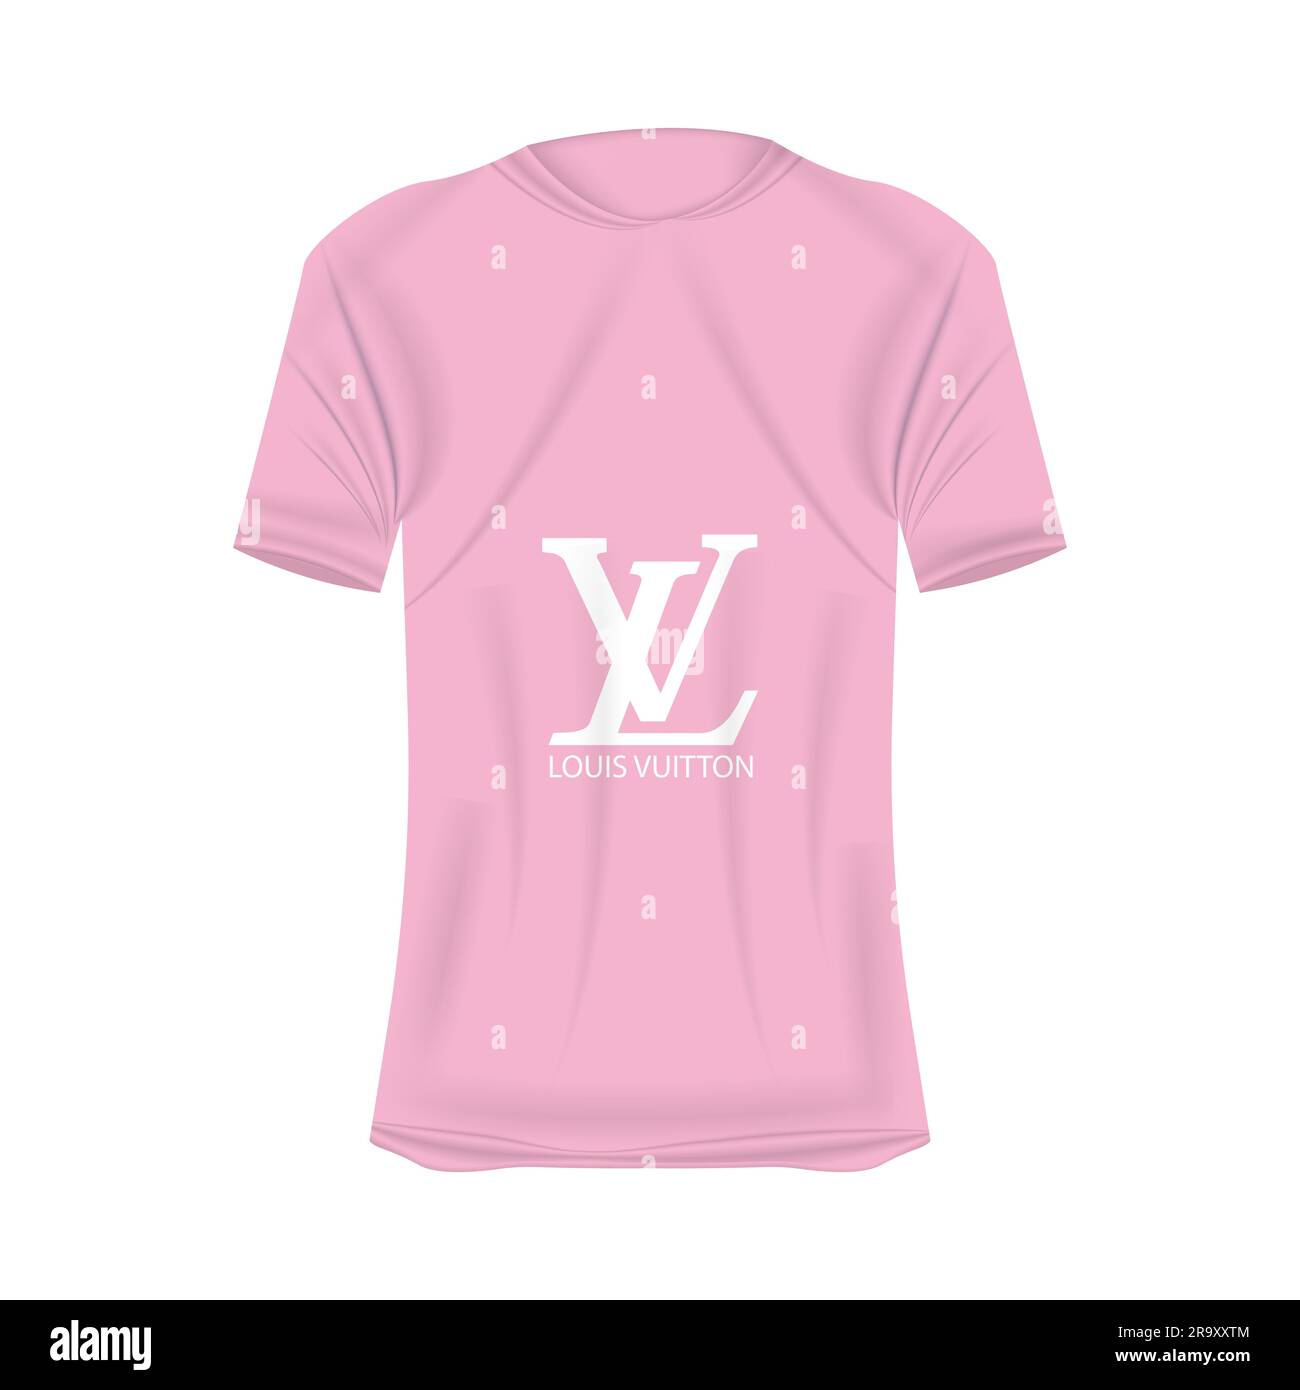 Premium Vector  Louis vuitton logo tshirt mockup in black colors mockup of  realistic shirt with short sleeves blank tshirt template with empty space  for design louisvuitton brand